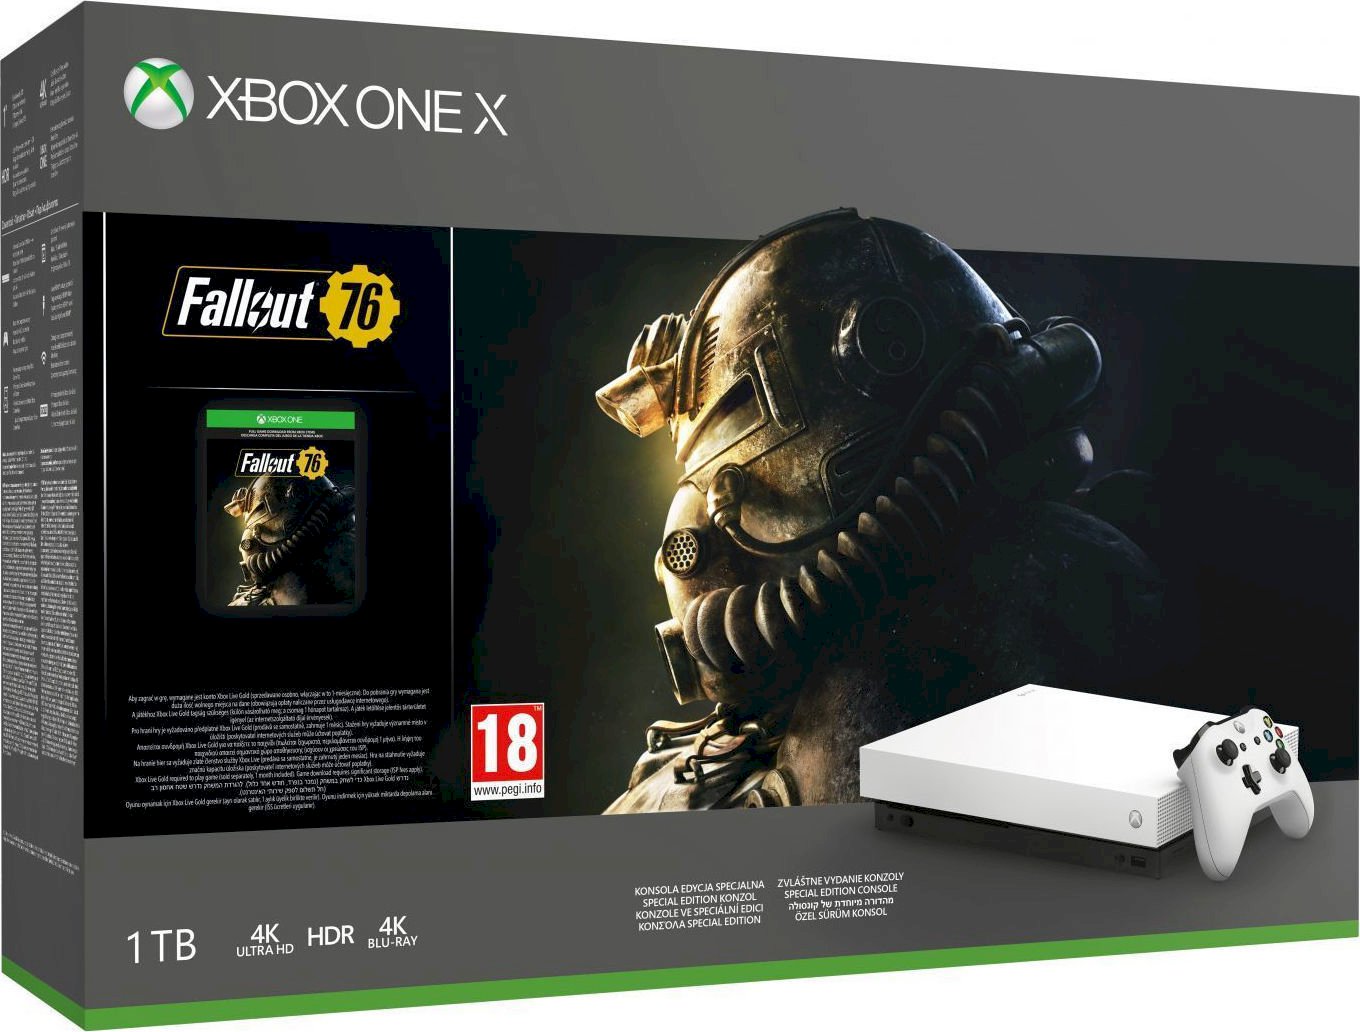 Xbox One X robot white incl. Fallout 76 USK 18